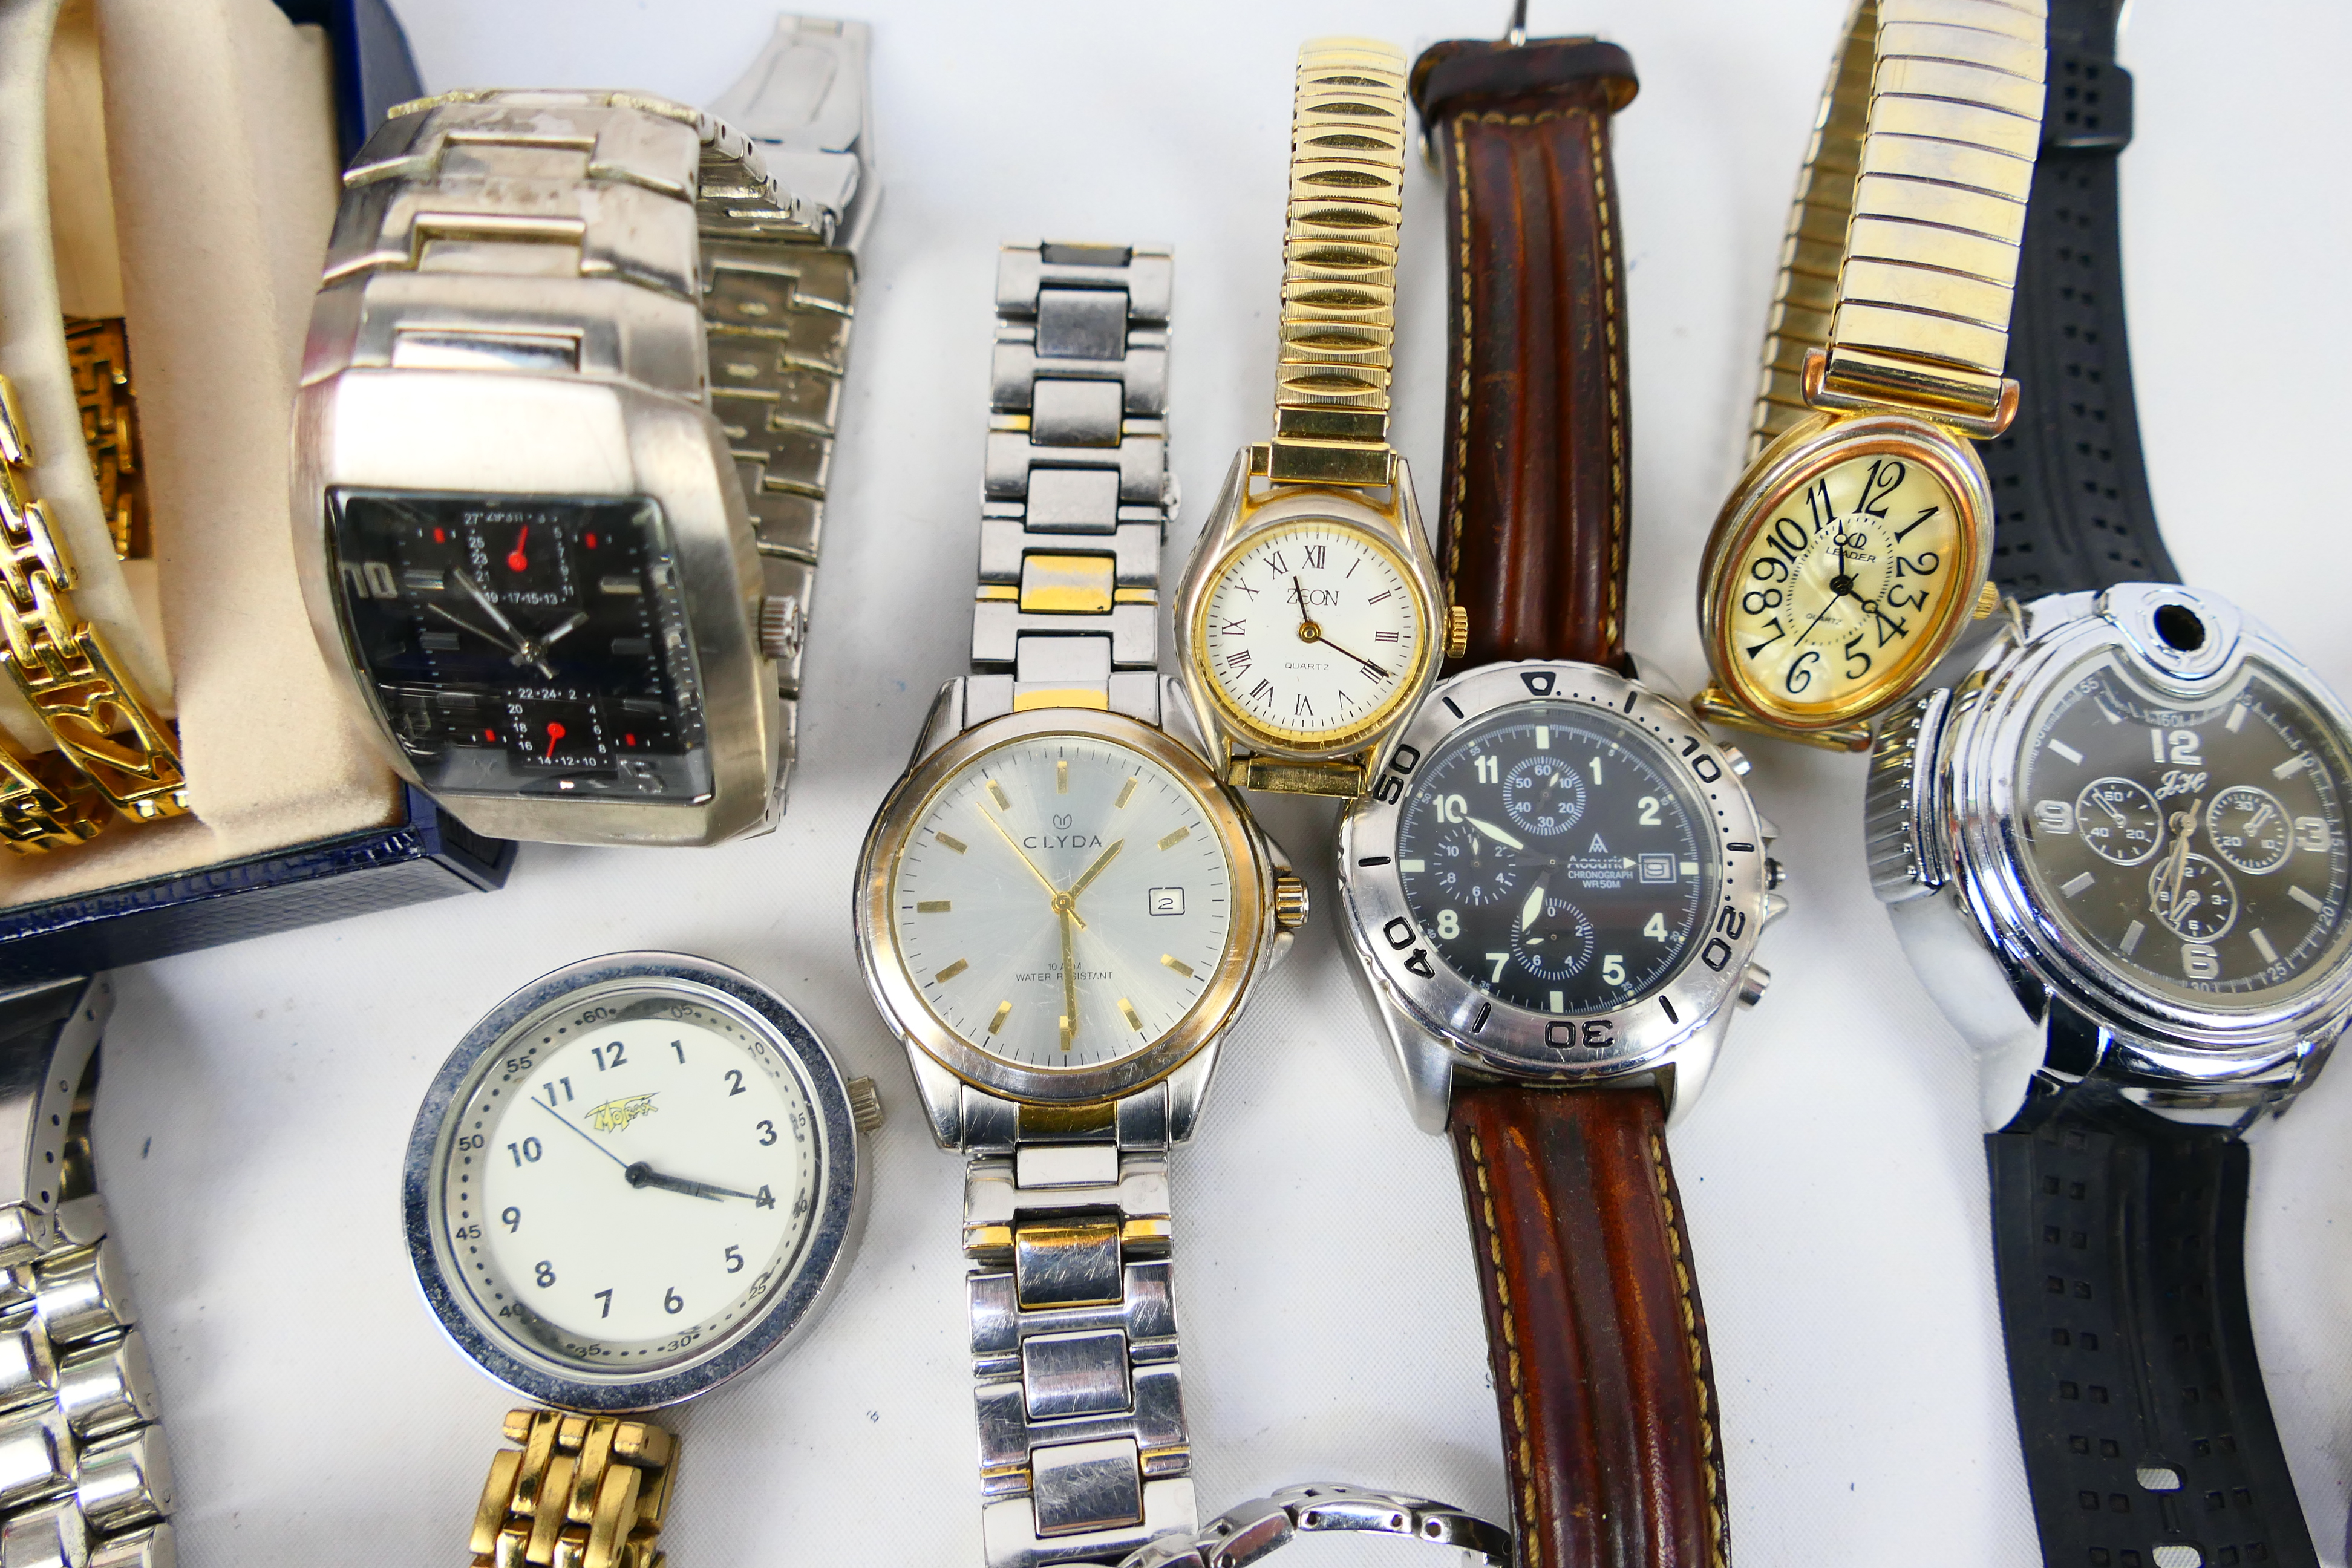 A collection of various wrist watches to include Zeon, Sekonda, Clyda and other. - Image 4 of 6